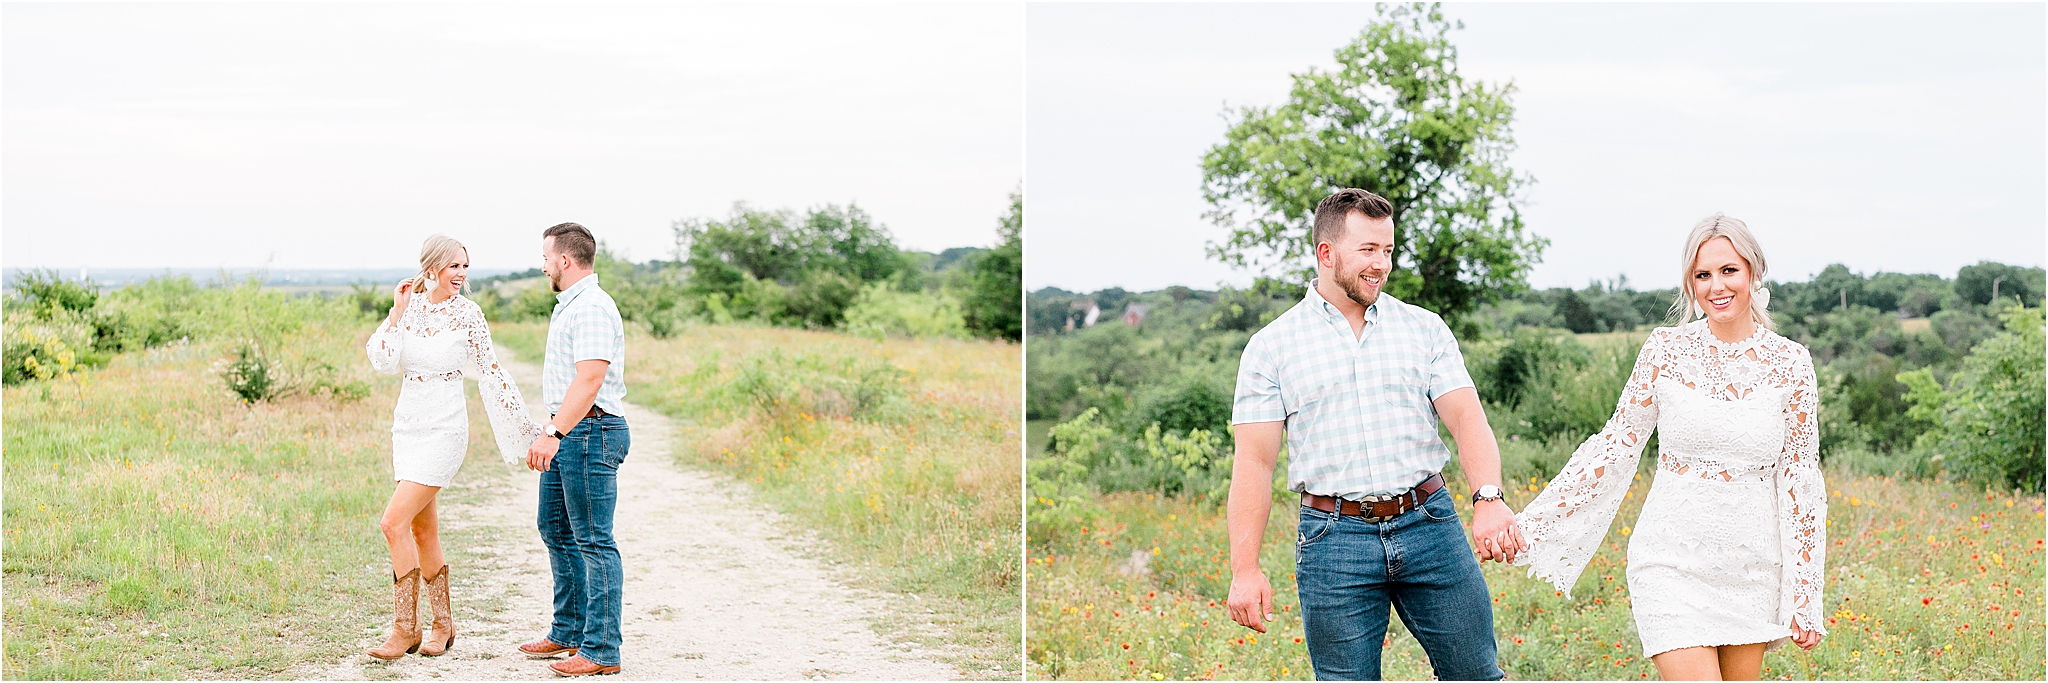 A dallas bride in a white lace dress holds hands with her fiance on the nature trails with greenery all around them at Tandy Hills Nature Preserve in Fort Worth, Texas during their engagement session 